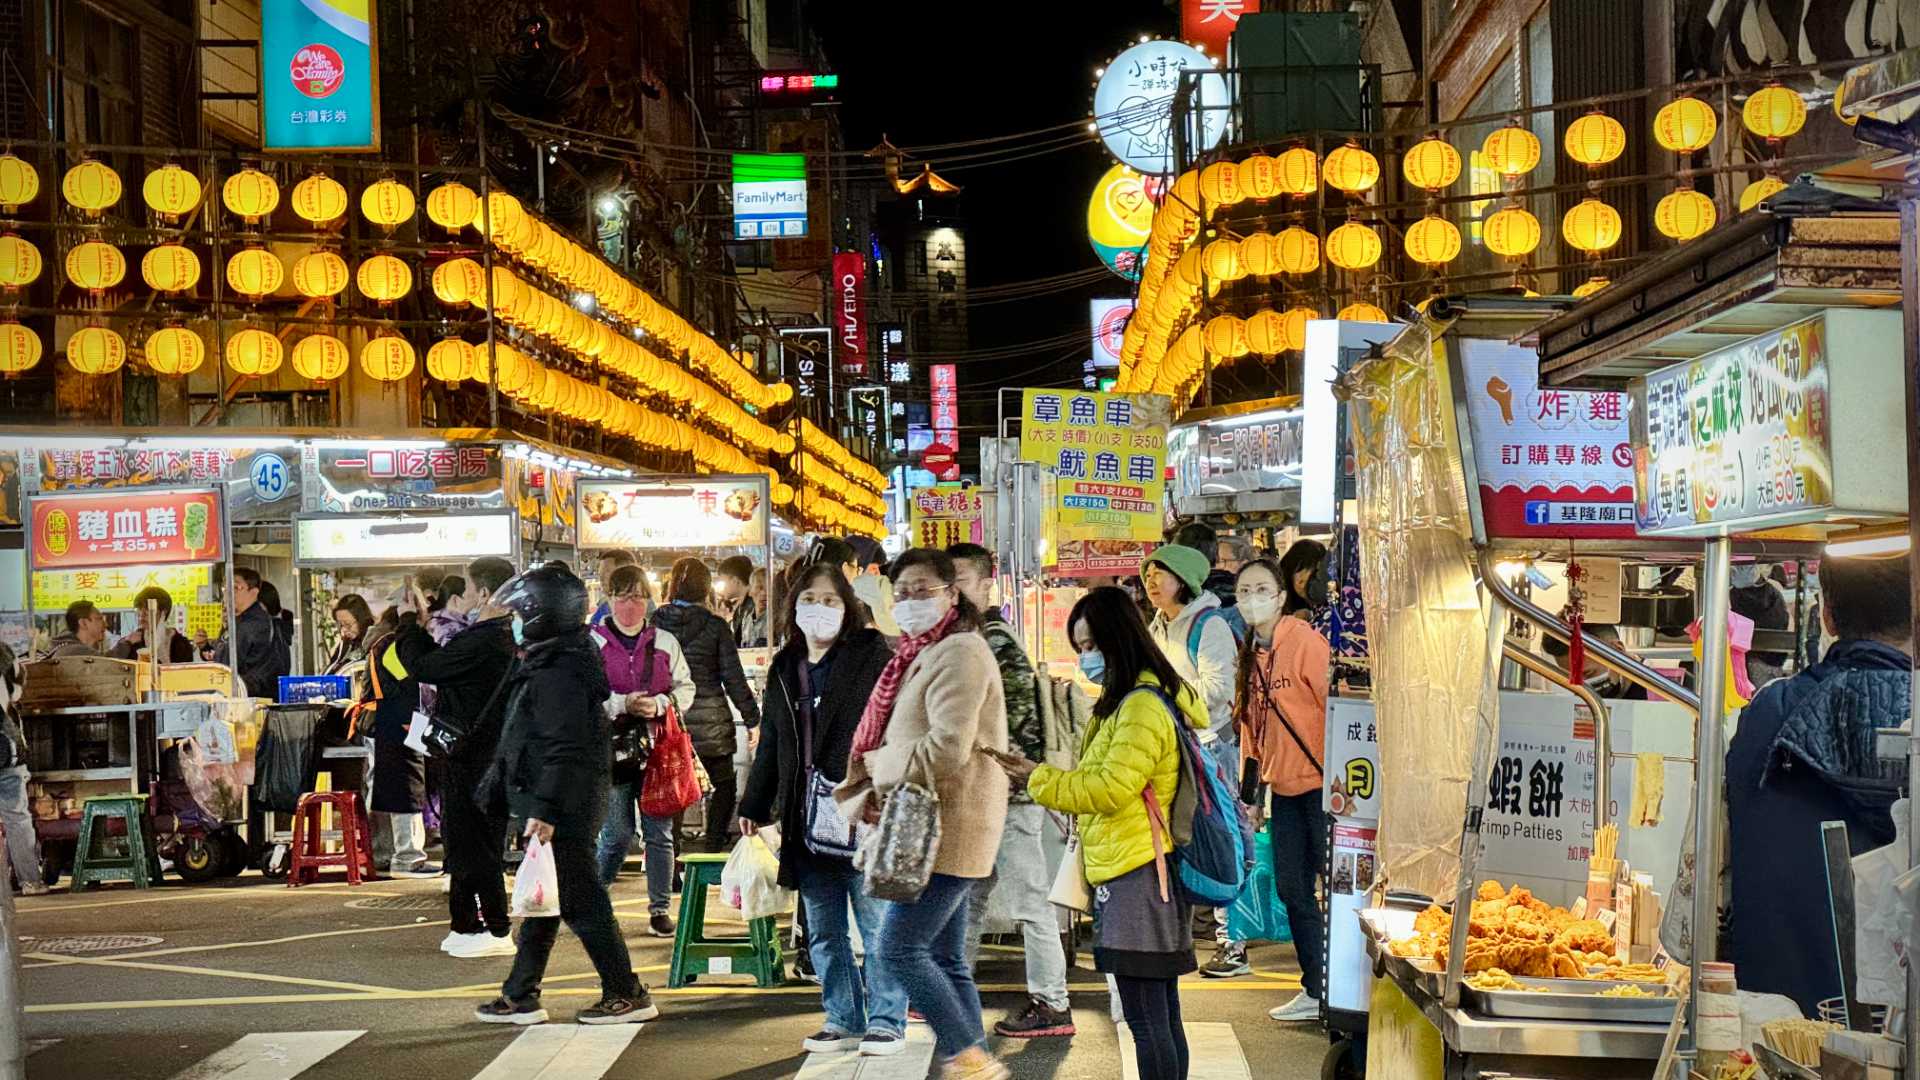 The entrance to a lively-looking, crowded night market in Keelung City. In the foreground, a stall is selling some kind of friend food. There are lanterns hanging above the street.